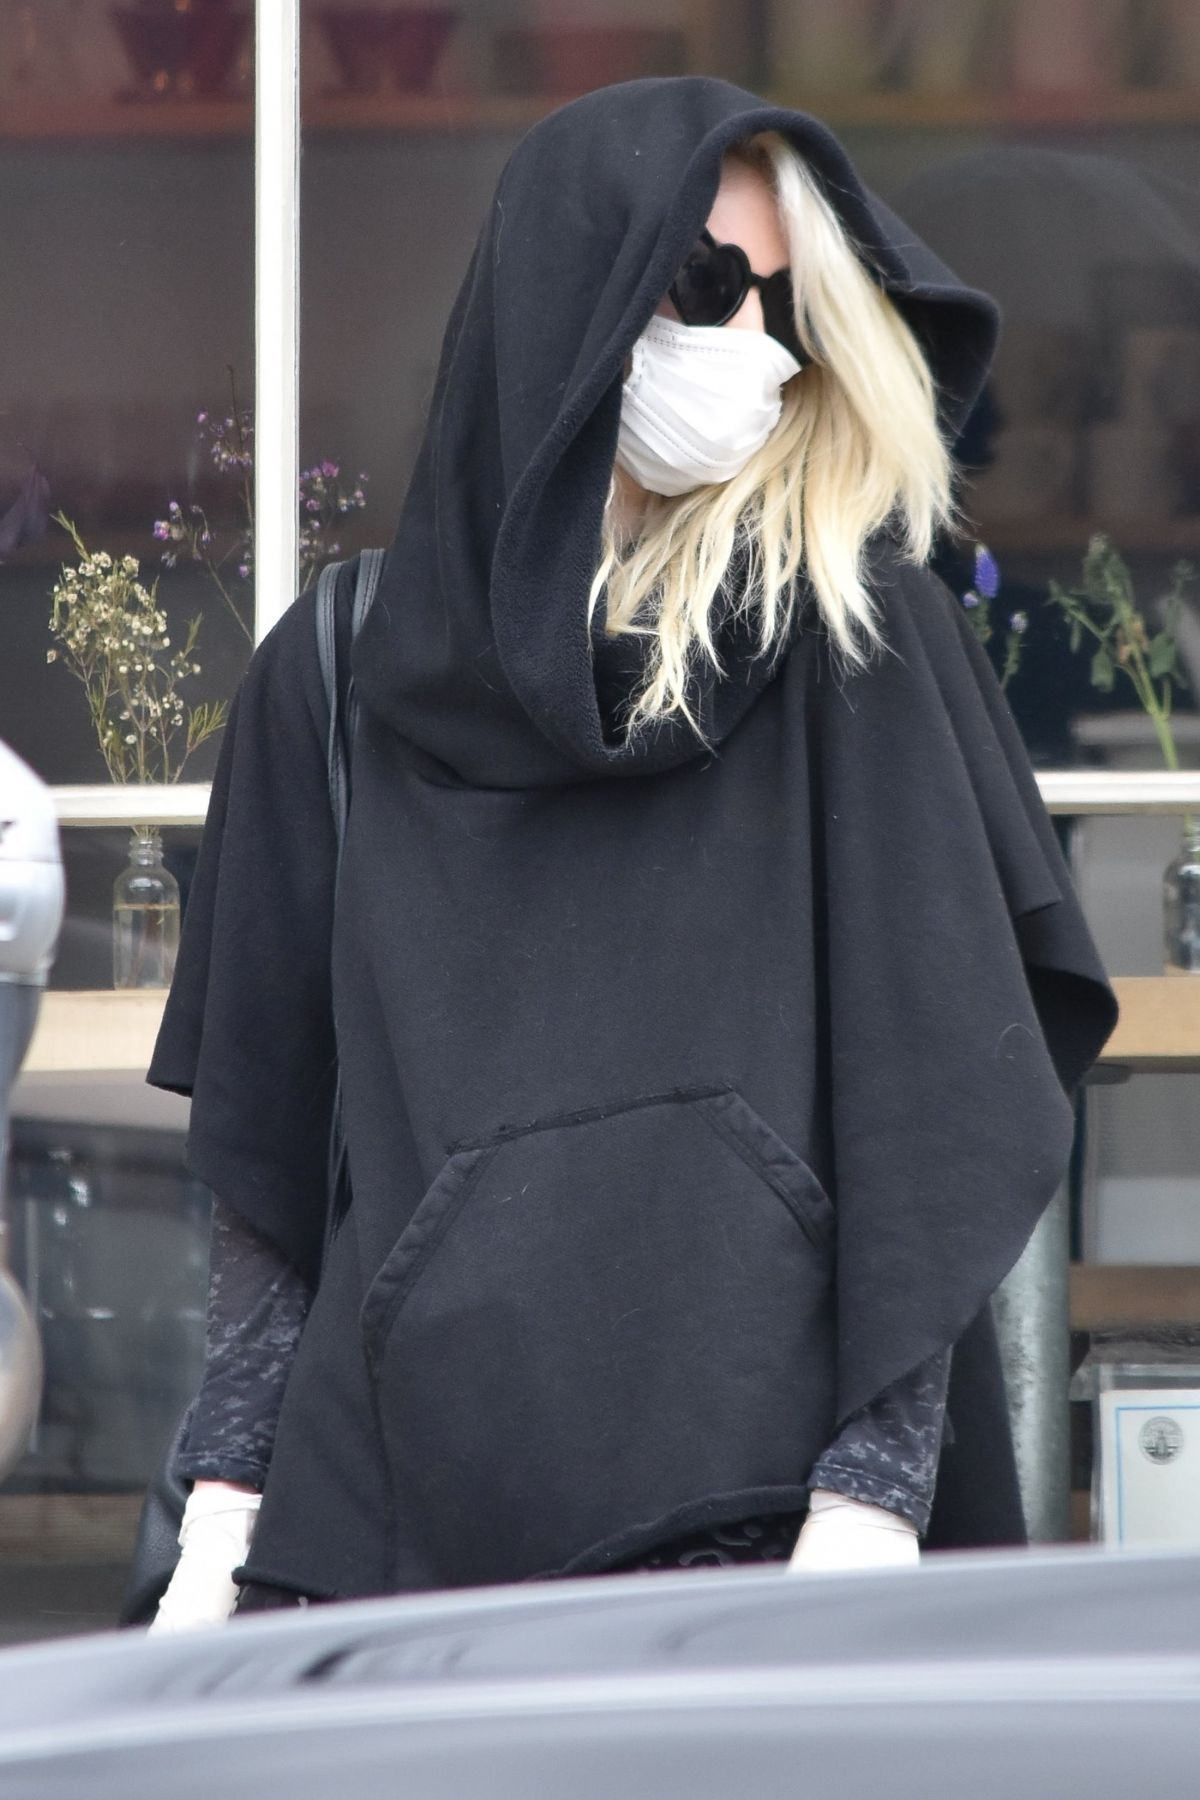 KIMBERLY STEWART Wearing Mask Out for Coffee in Los Angeles 04/19/2020 ...